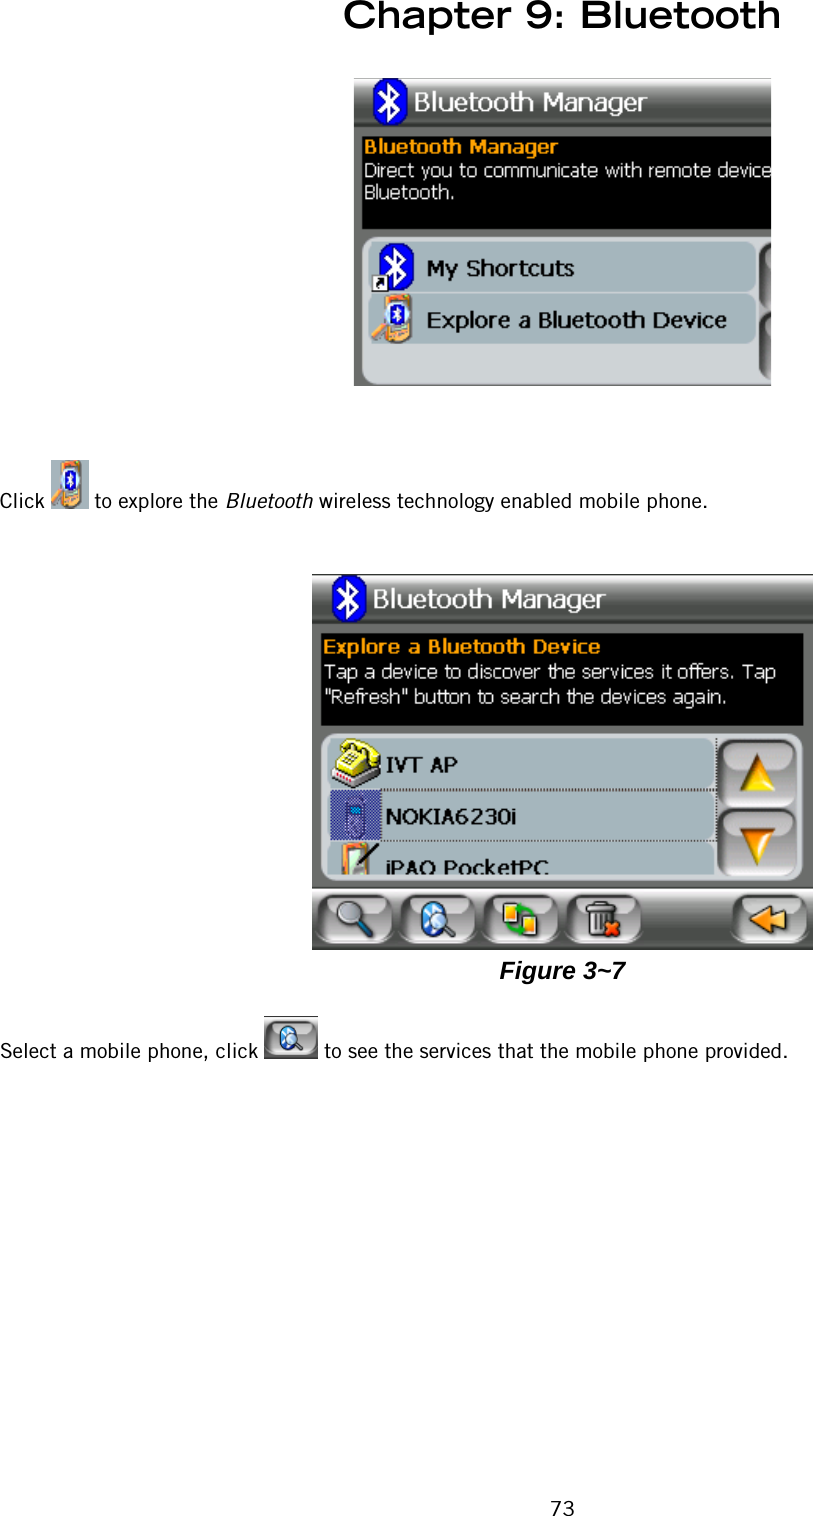 Chapter 9: Bluetooth73Click   to explore the Bluetooth wireless technology enabled mobile phone.Figure 3~7Select a mobile phone, click   to see the services that the mobile phone provided.